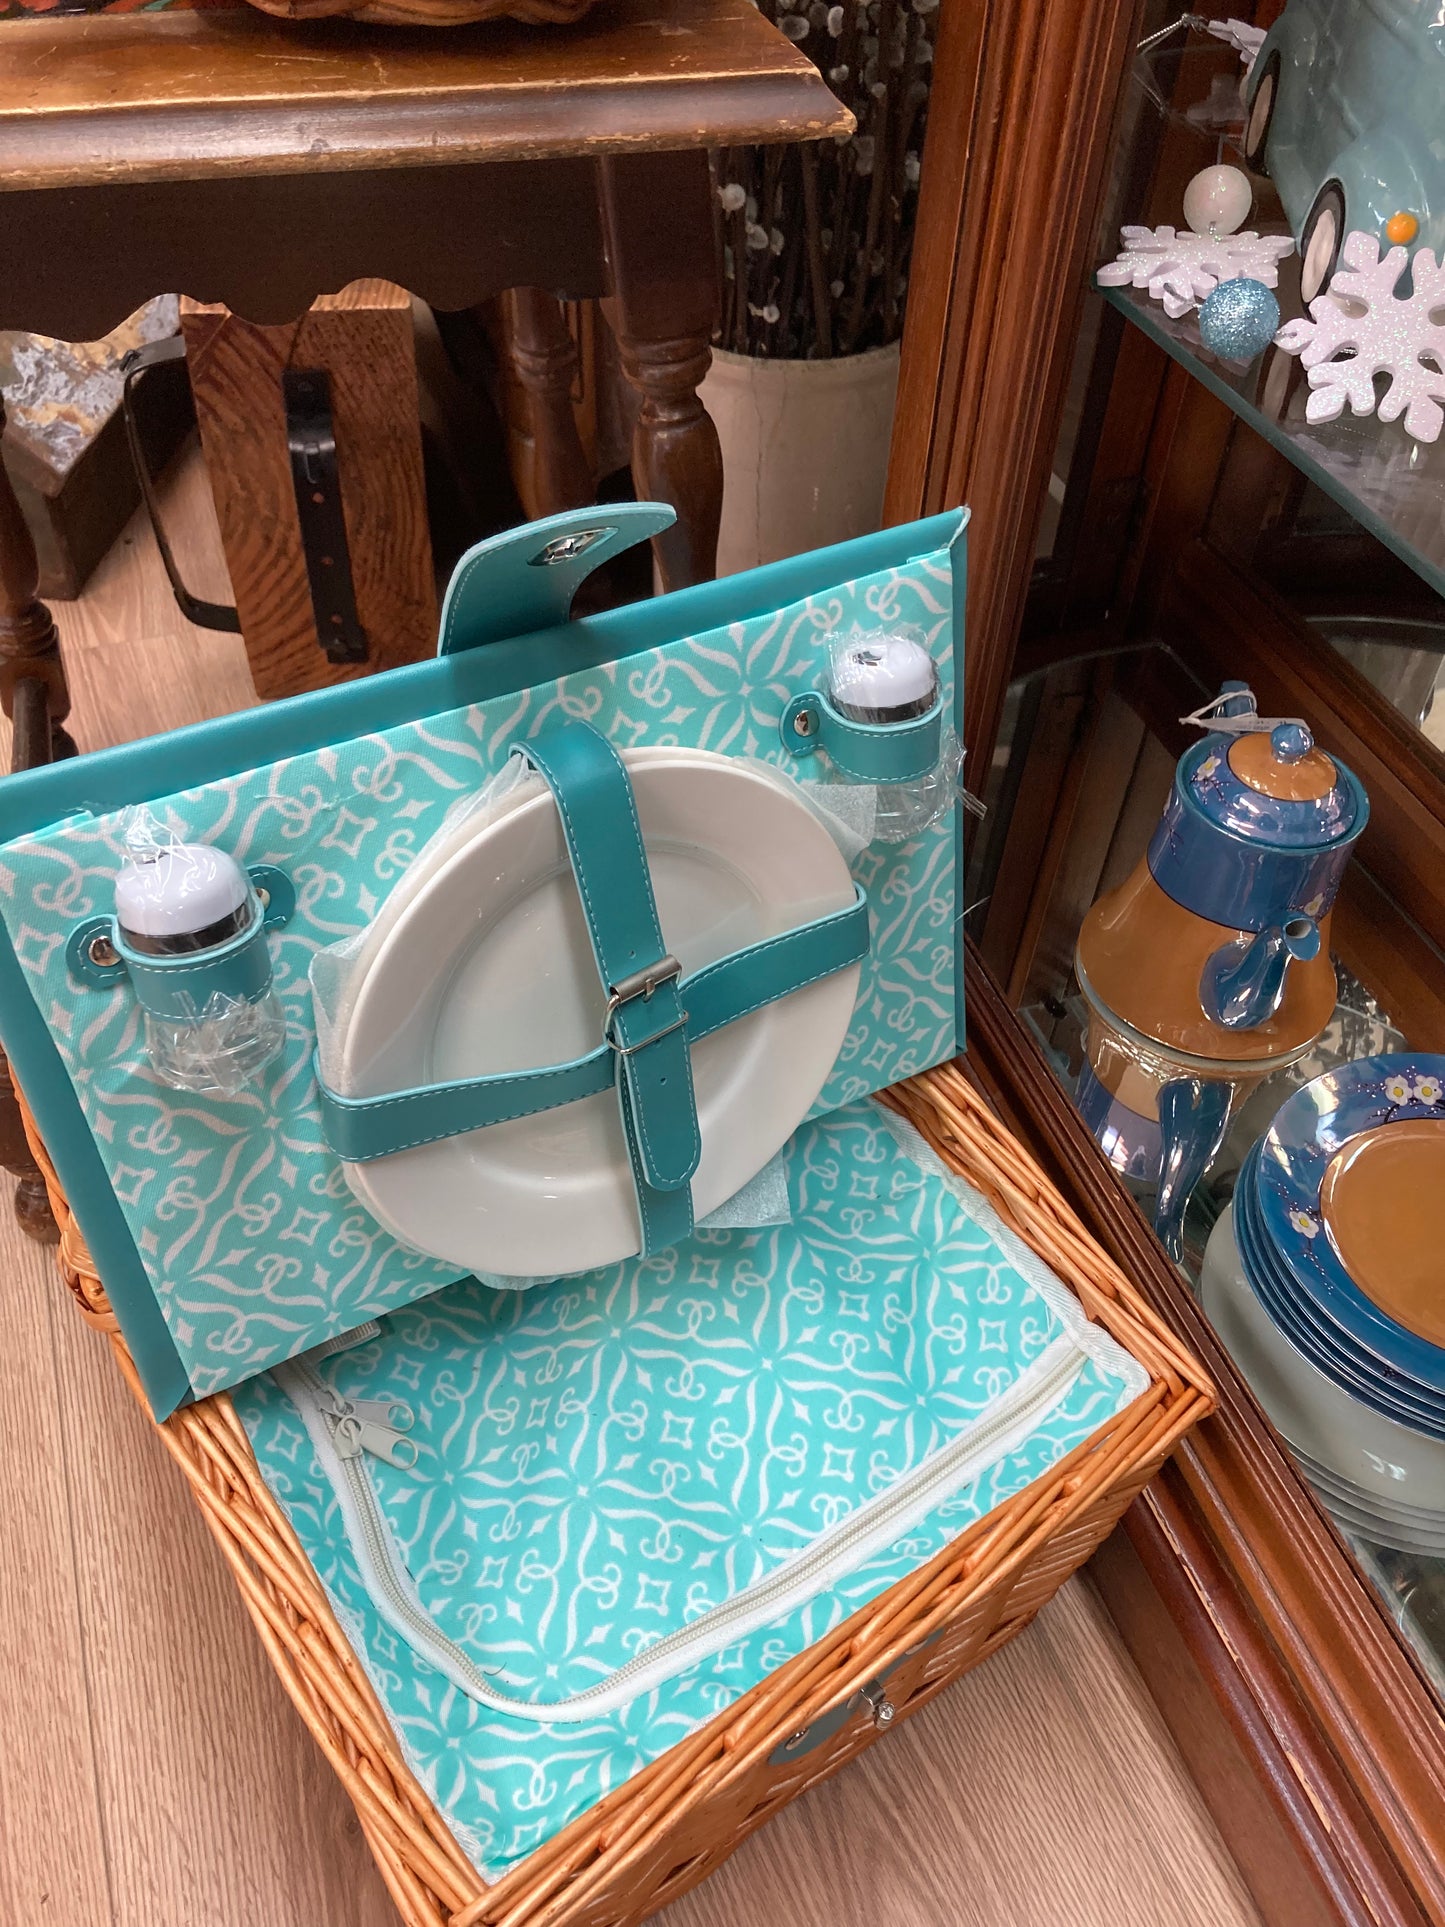 Fully stocked insulated picnic basket teal lids and accents